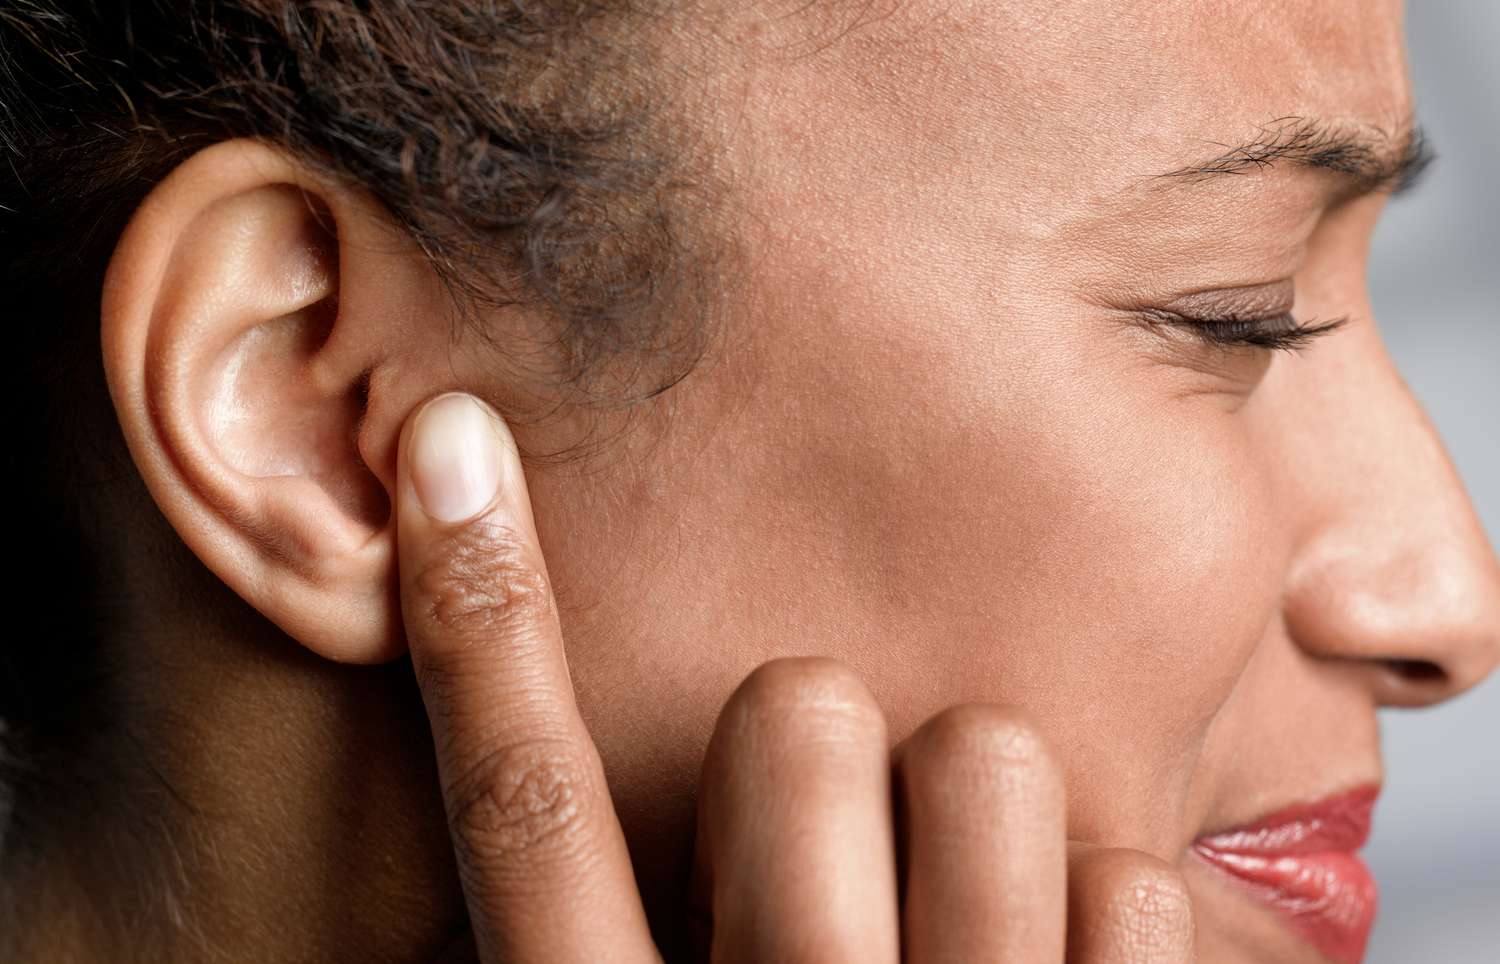 Ear Pain and Allergies: Treatment and Preventing Infection